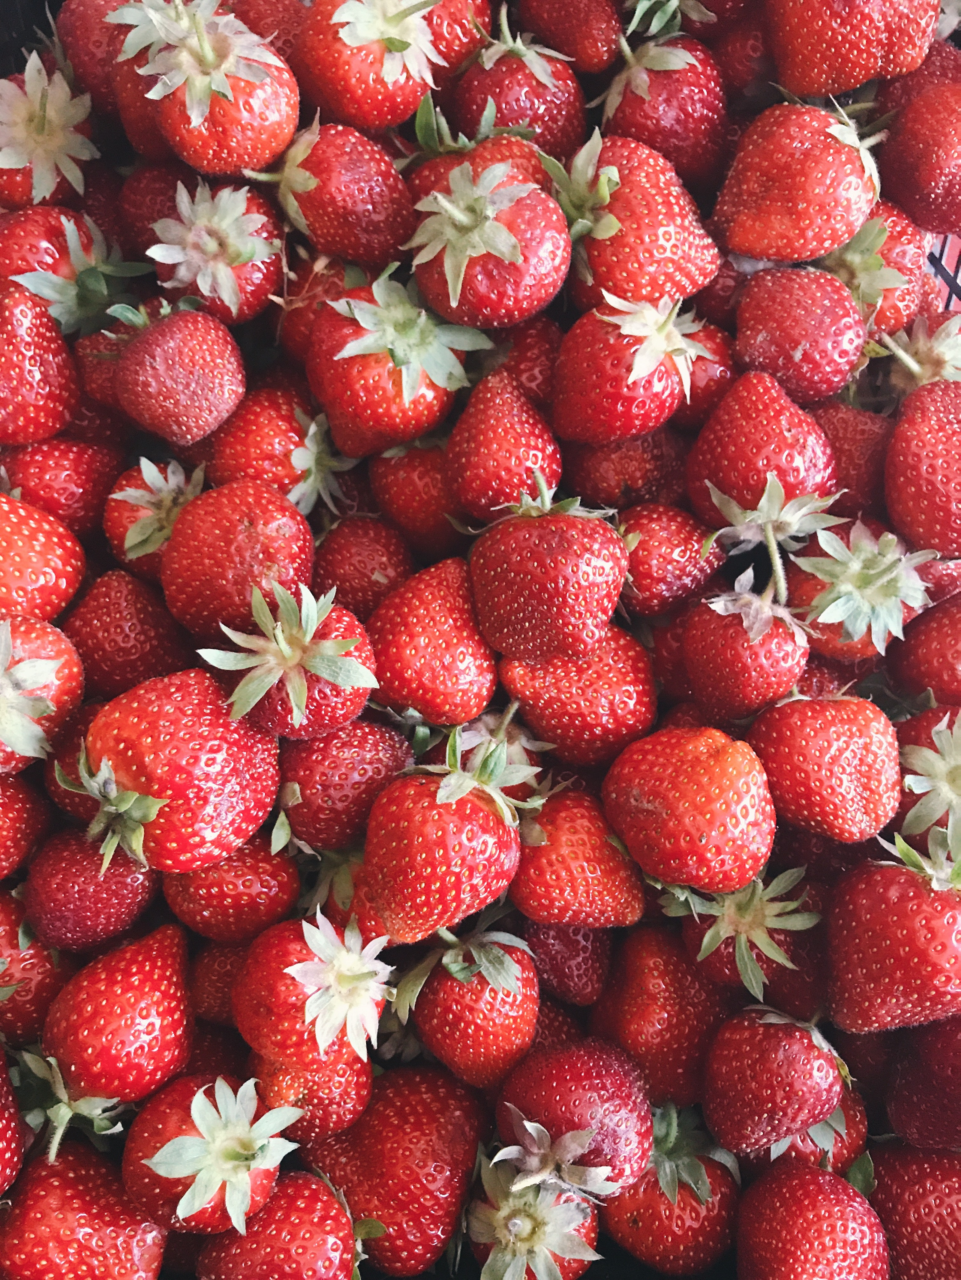 Image of a large pile of strawberries.